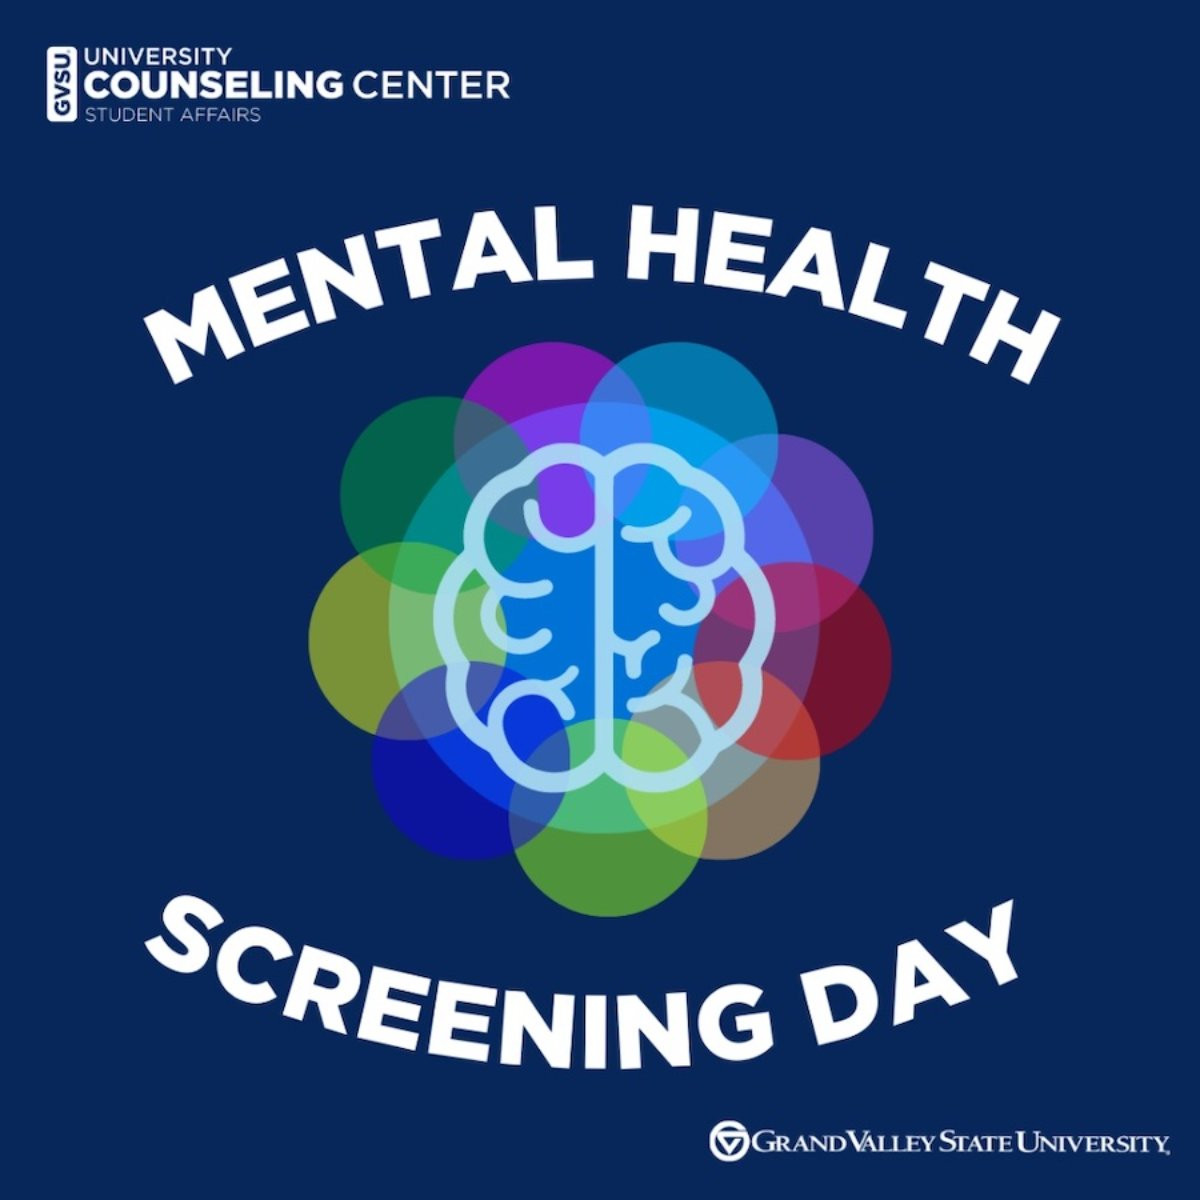 A colorful brain with the words Mental Health Screening Day and University Counseling Center in the corner